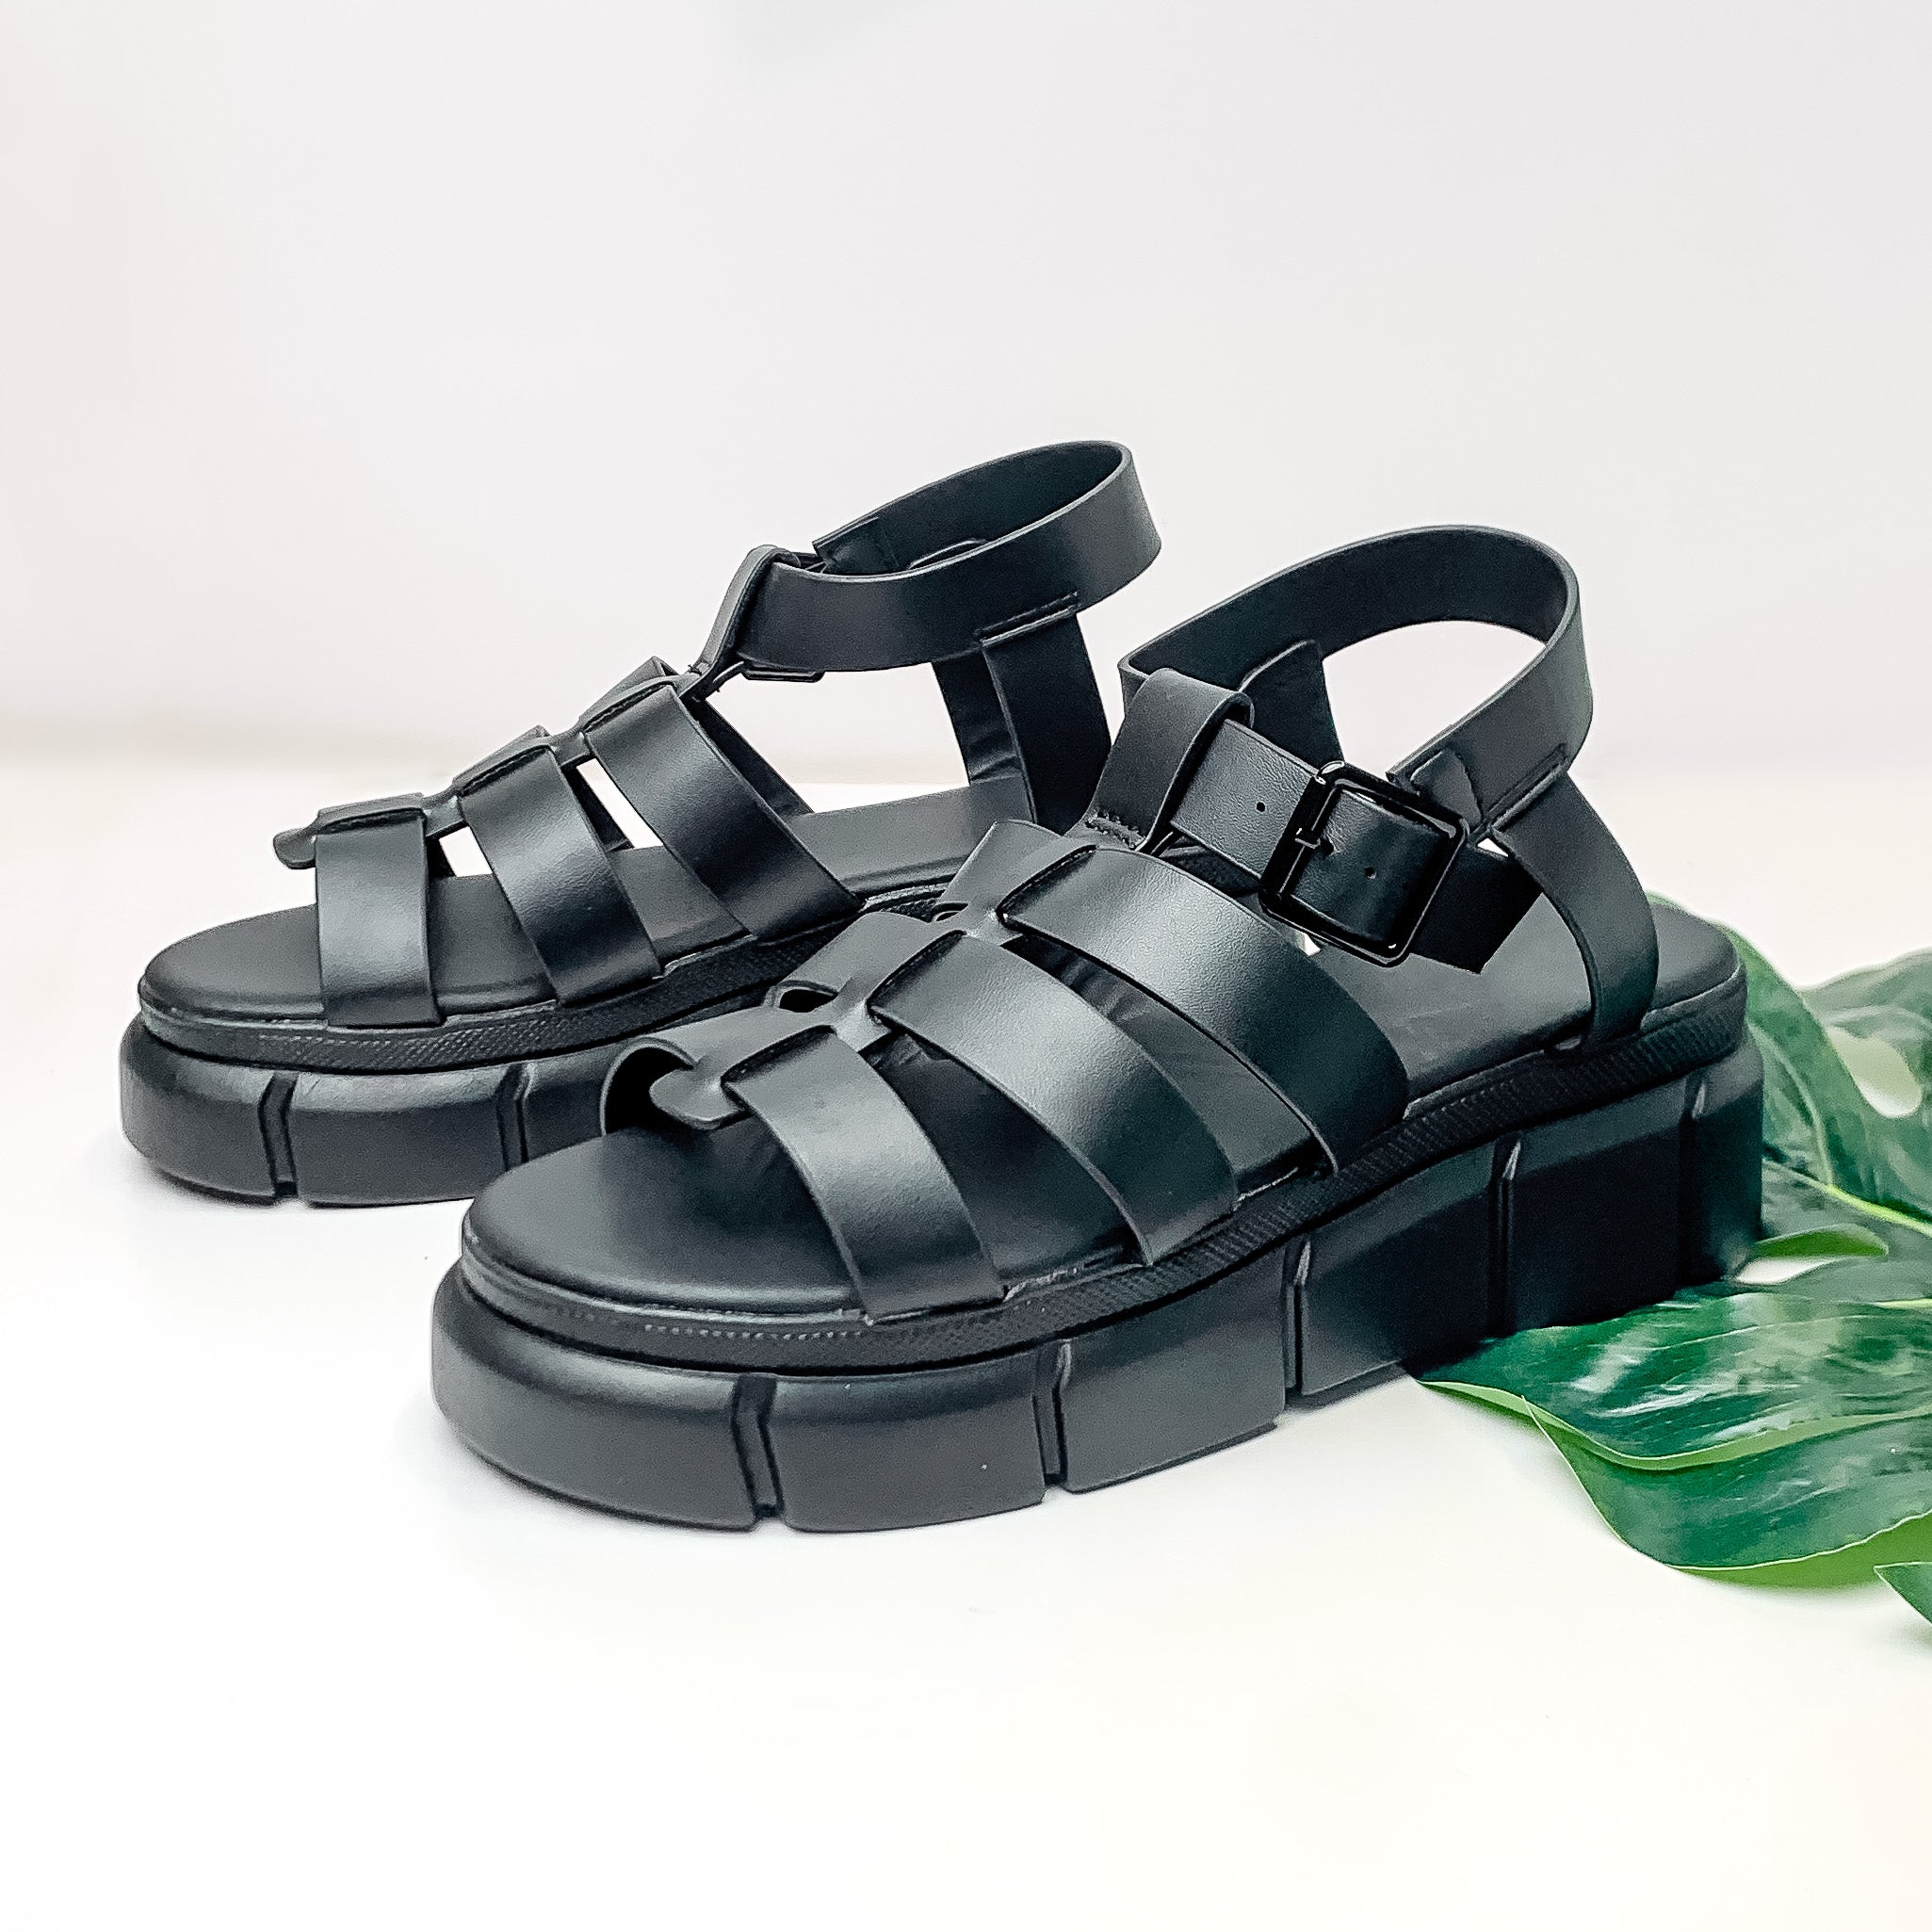 Pictured is a pair of platform, gladiator sandals with an adjustable ankle strap in black. These shoes are pictured on a white background with a green leaf under one of the shoes. 